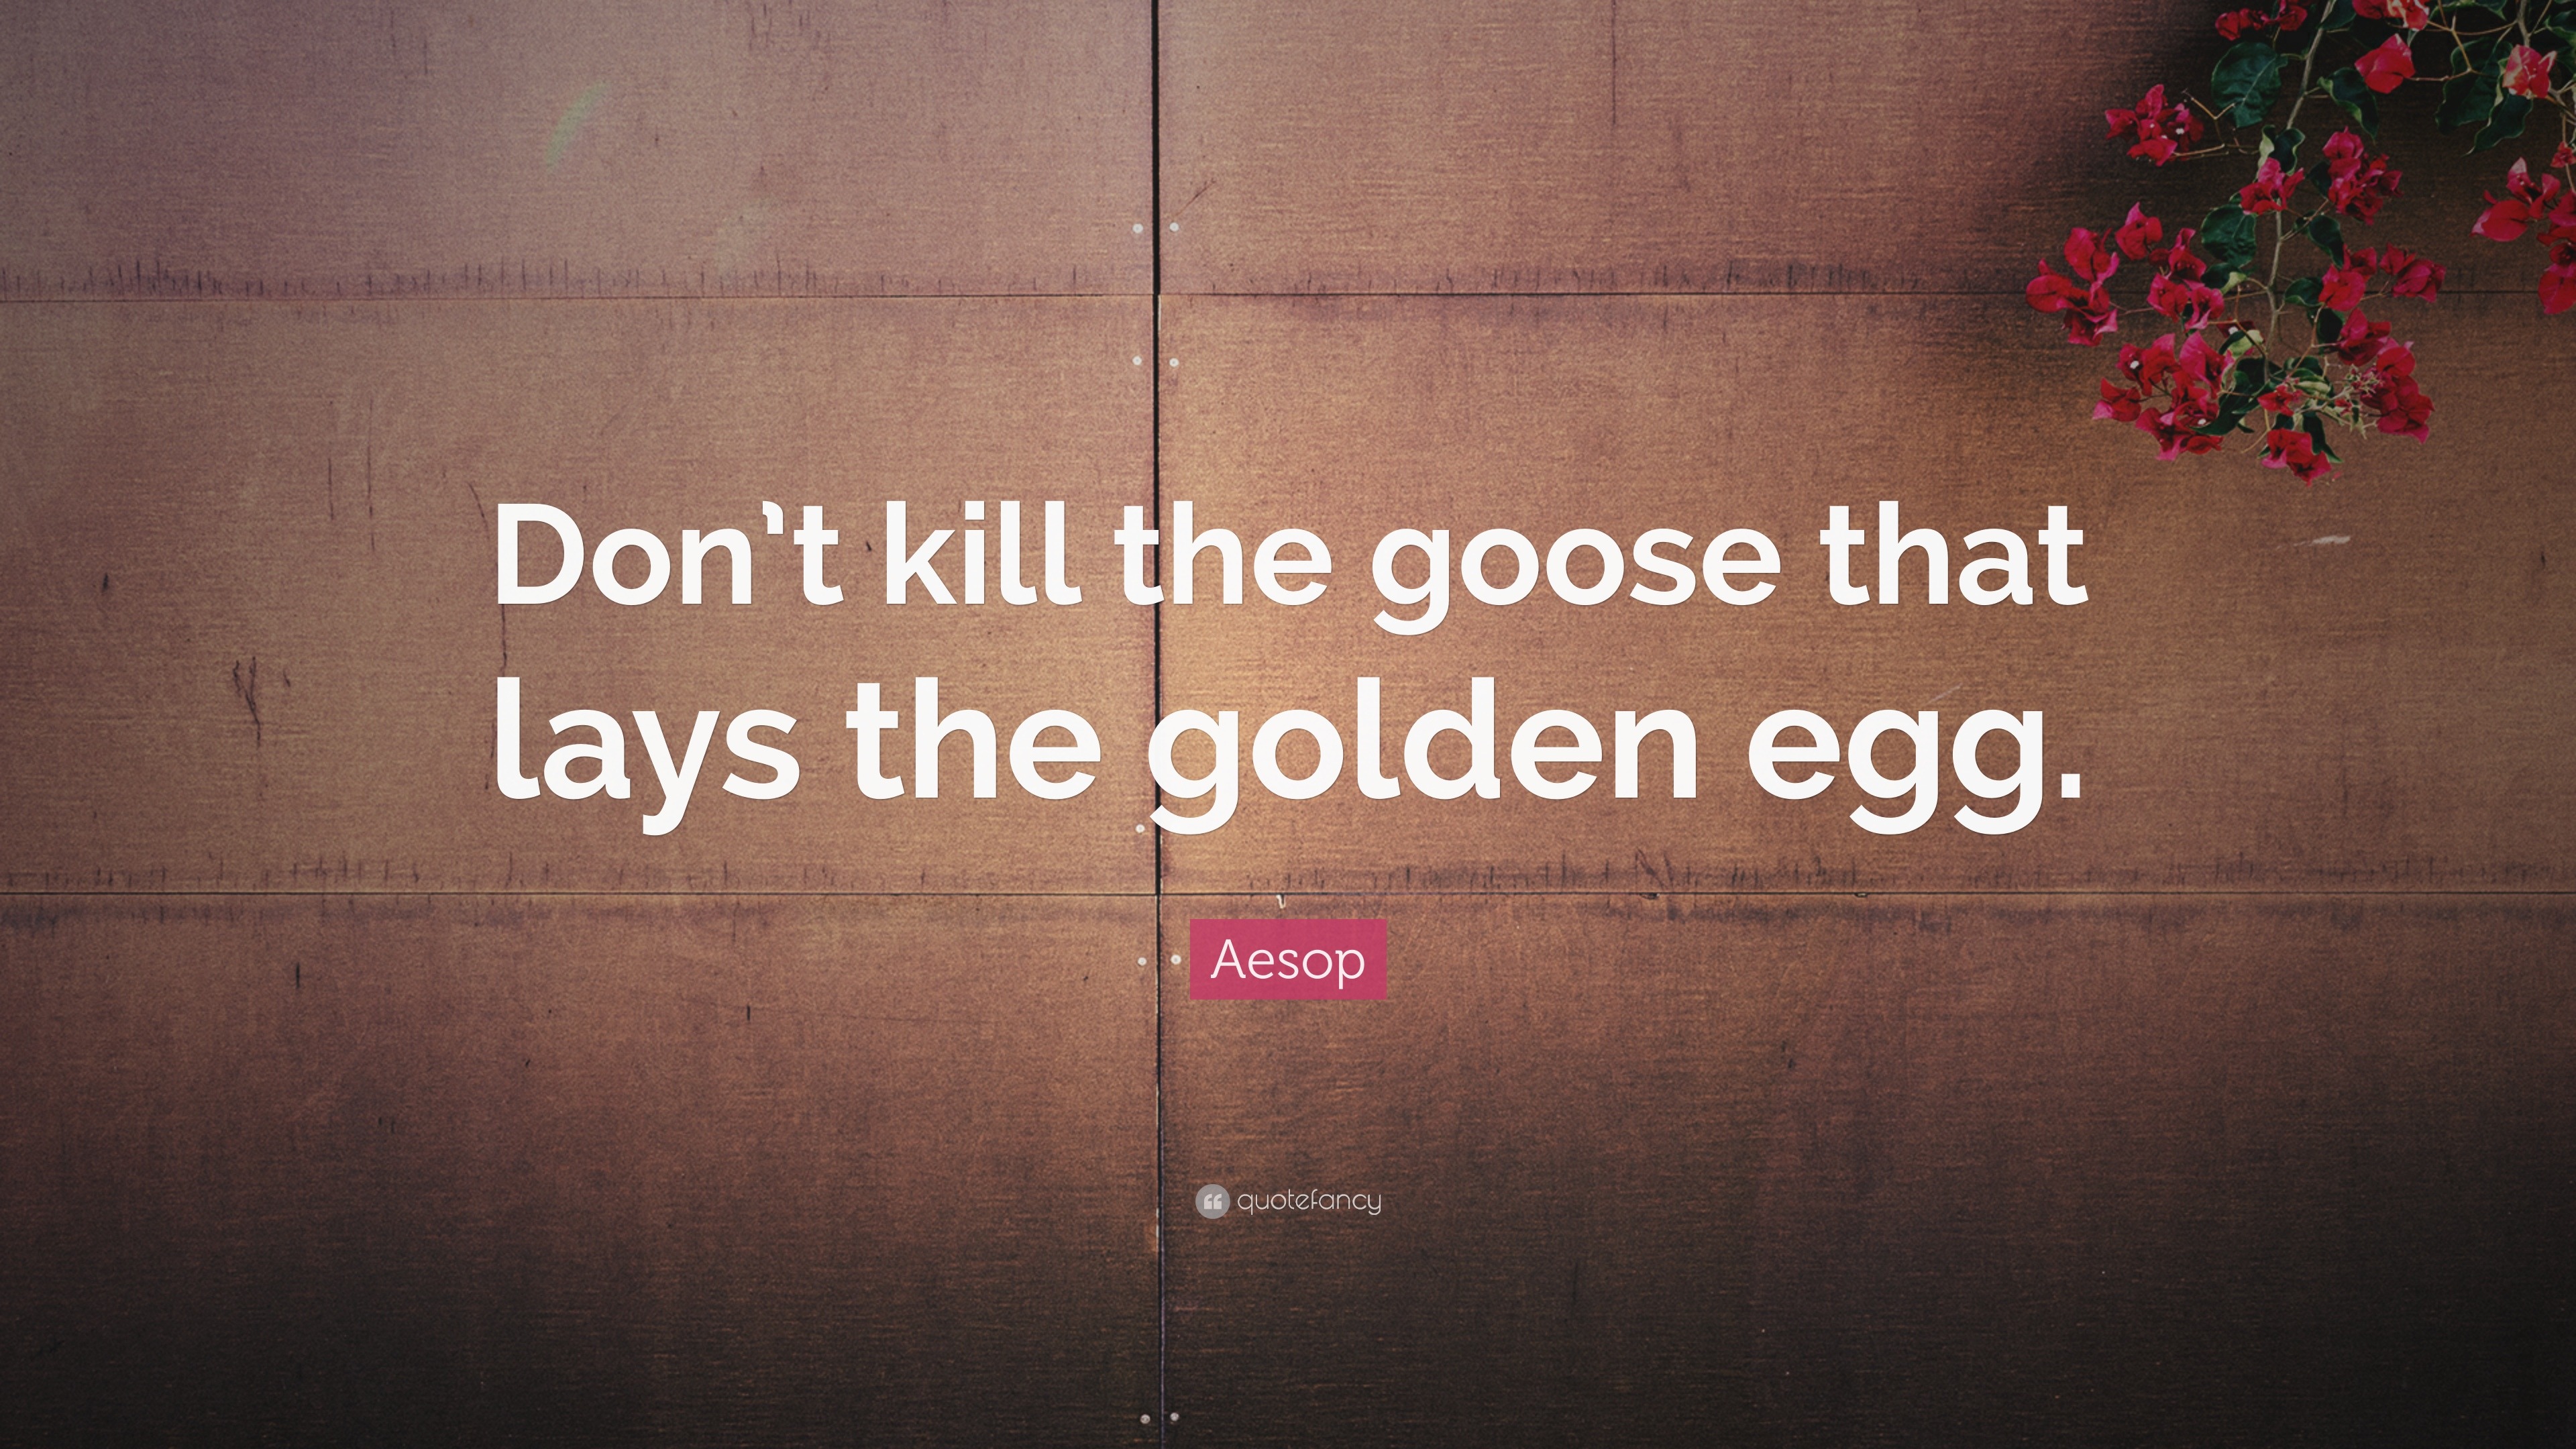 Utallige Bagvaskelse Fredag Aesop Quote: “Don't kill the goose that lays the golden egg.”